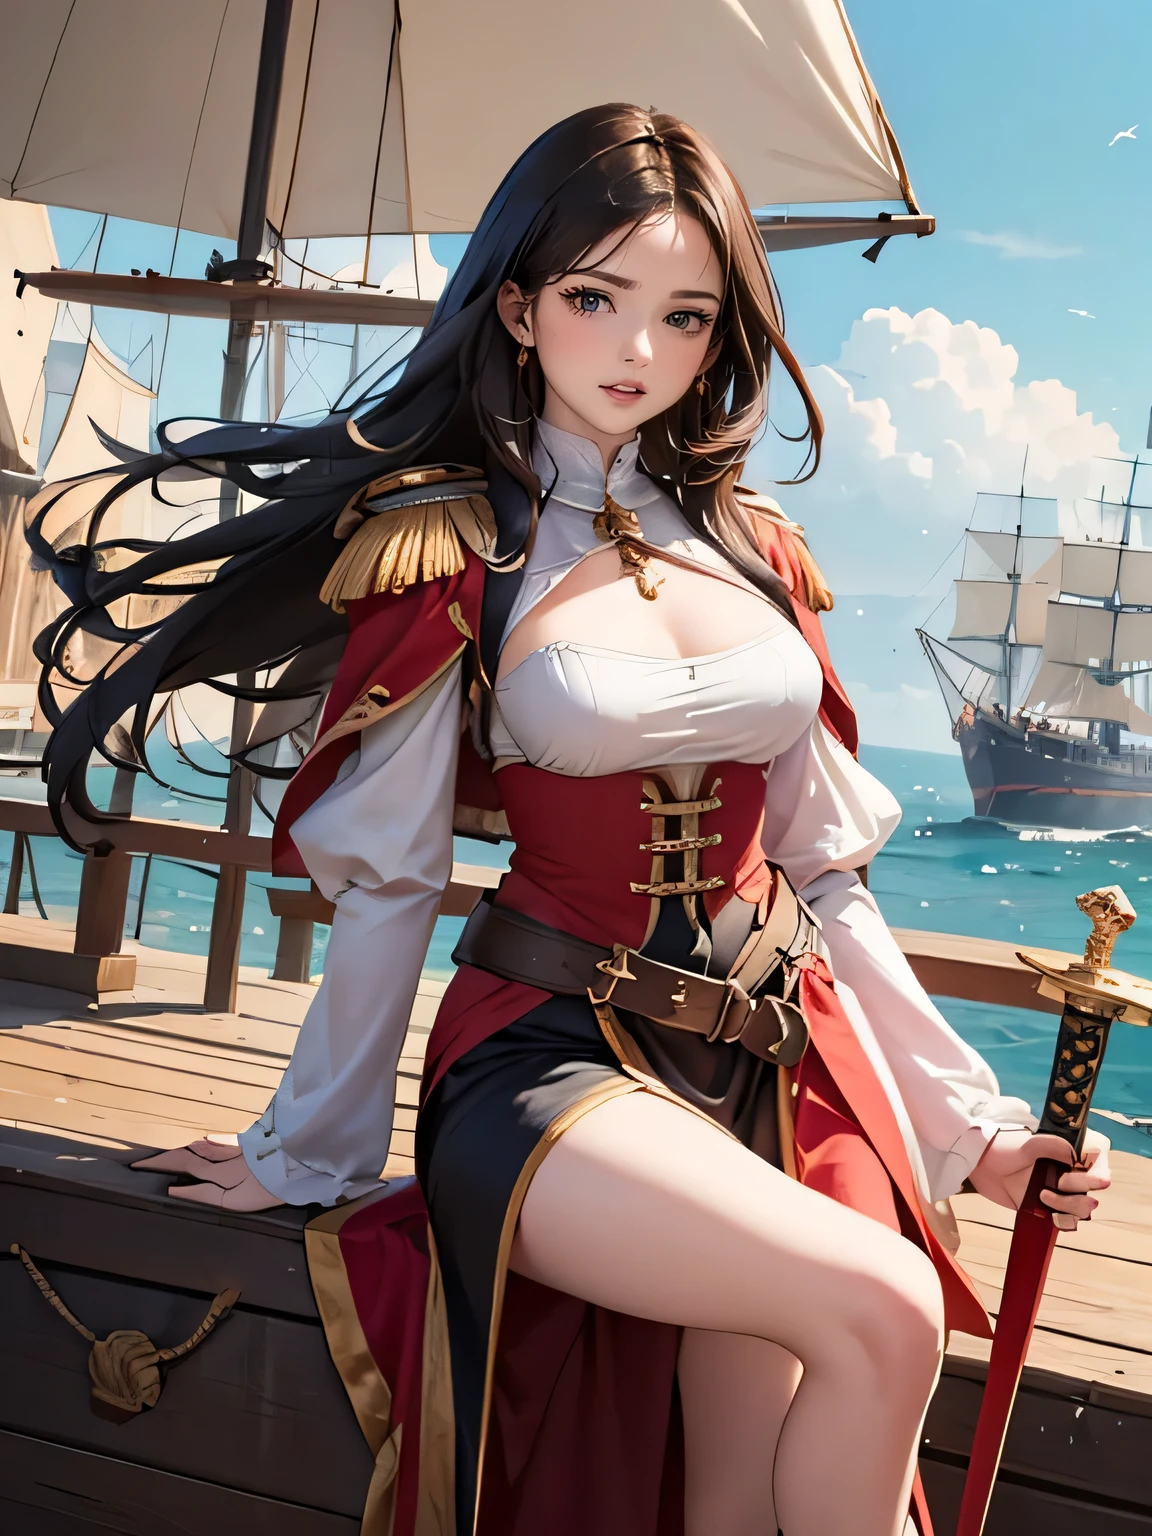 ((medieval world)), (noble's daughter who became a adventurer with an old lieutenant, medieval European aristocratic dress, breasts, she has a long westerner sword), on the deck of a medieval large galleon that was made of woods during the Age of Discovery in the Middle Ages, windy, a lot of cargo, standing and spread legs, smiling, 